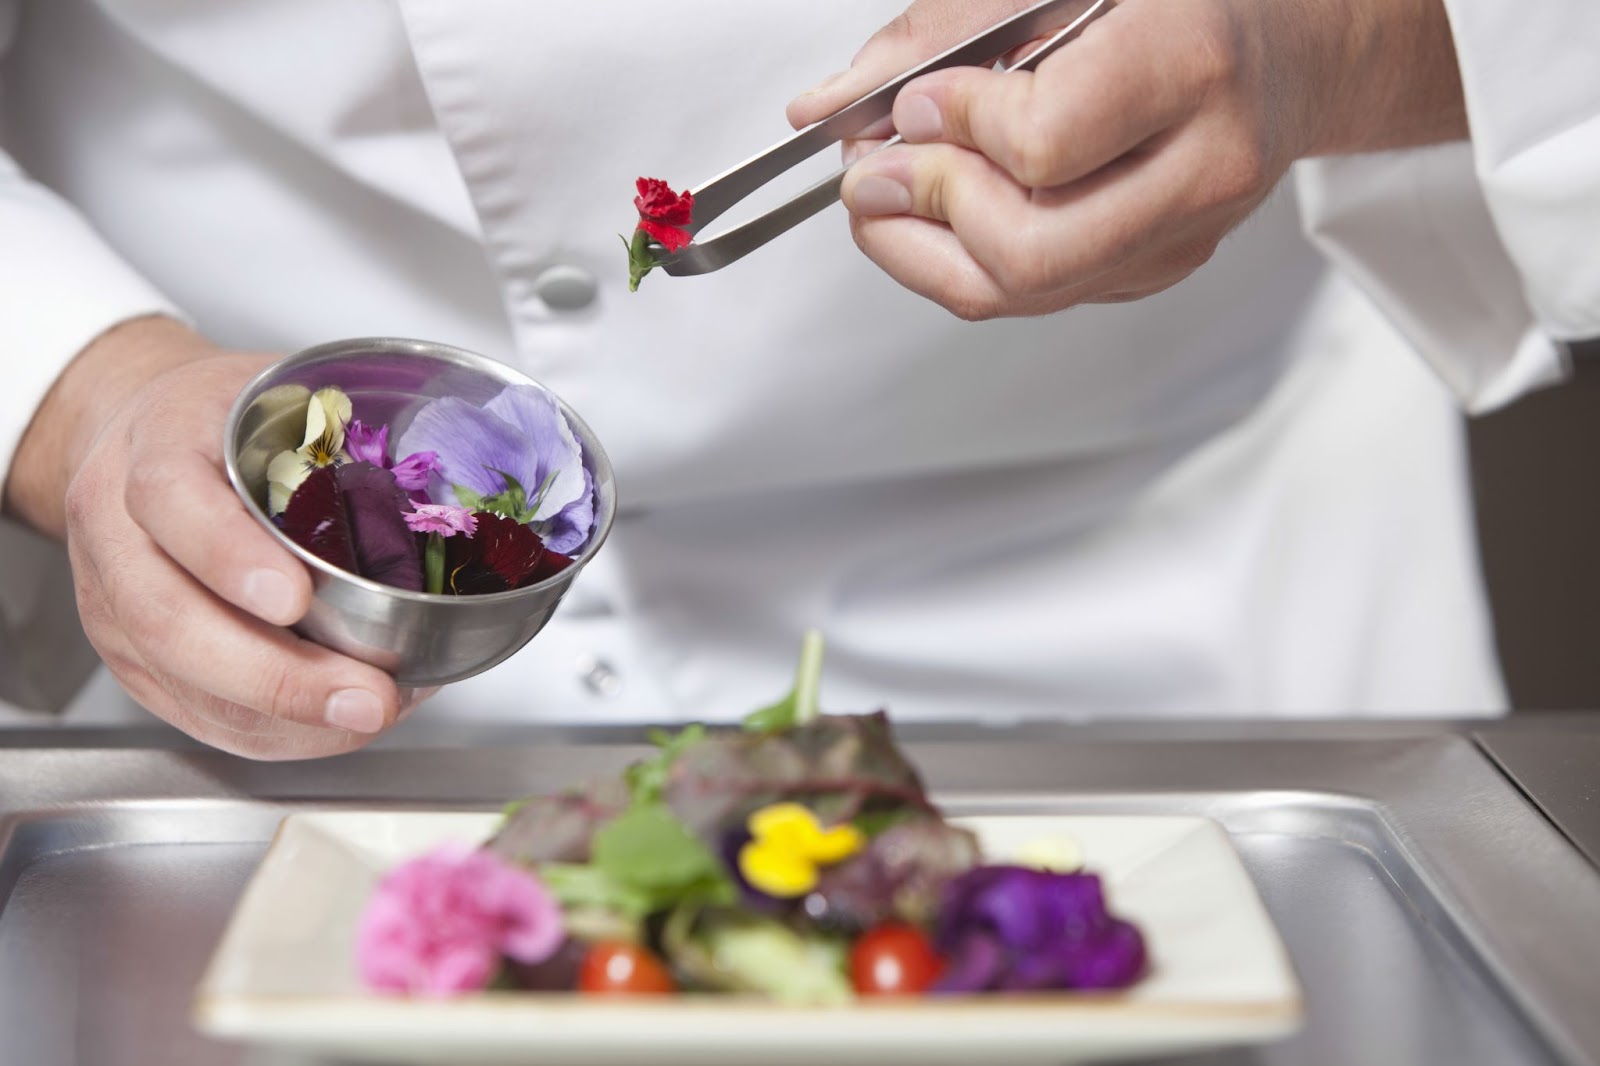 A chef adding Edible flowers to their food prep.